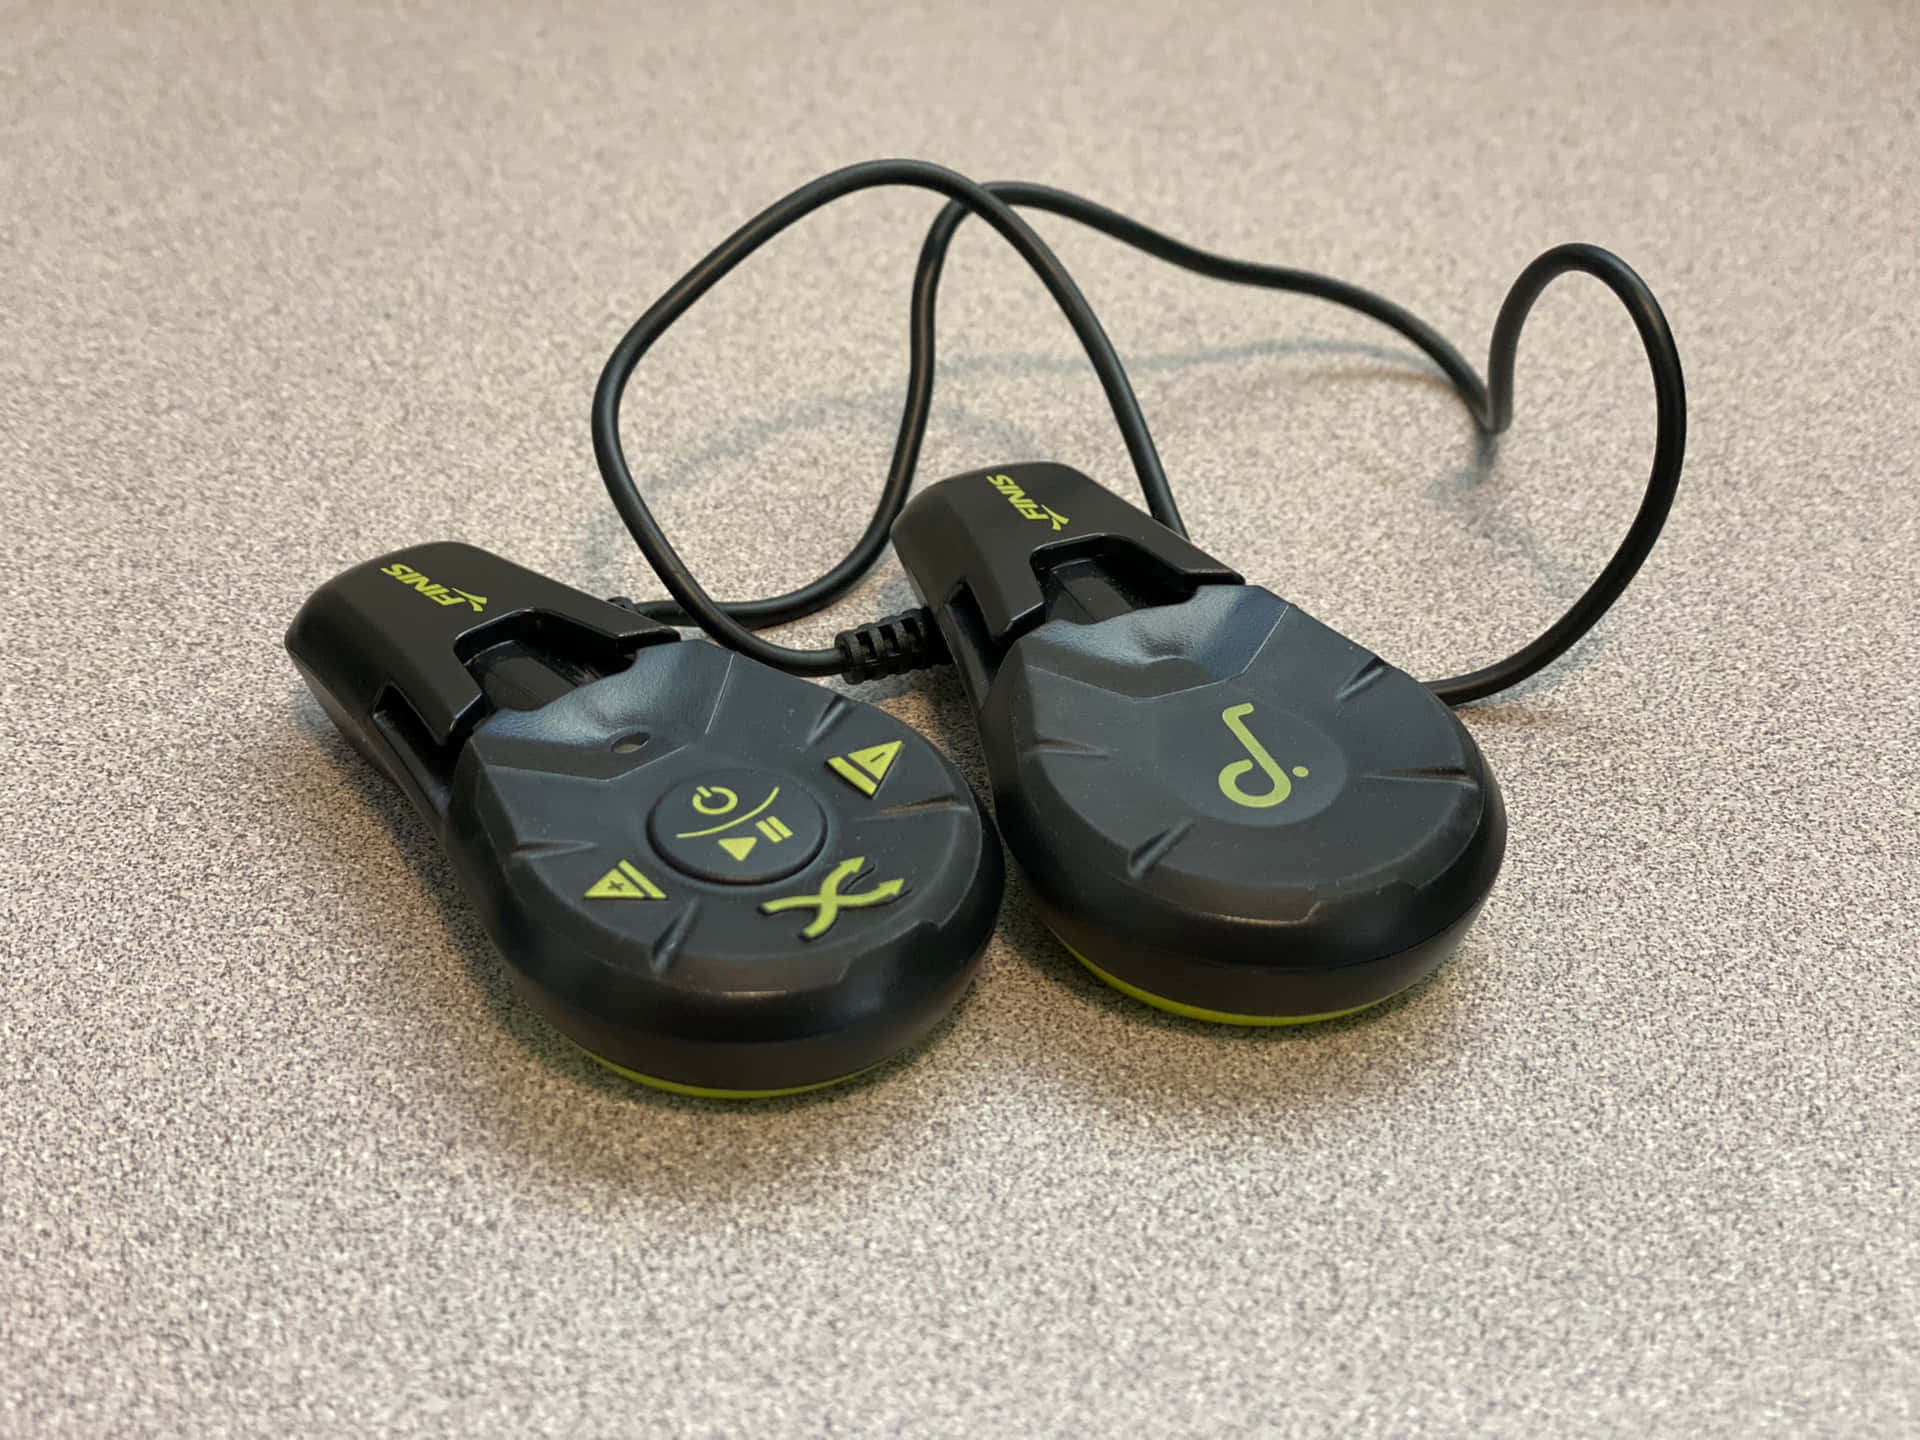 two wireless headphones with a yellow cord